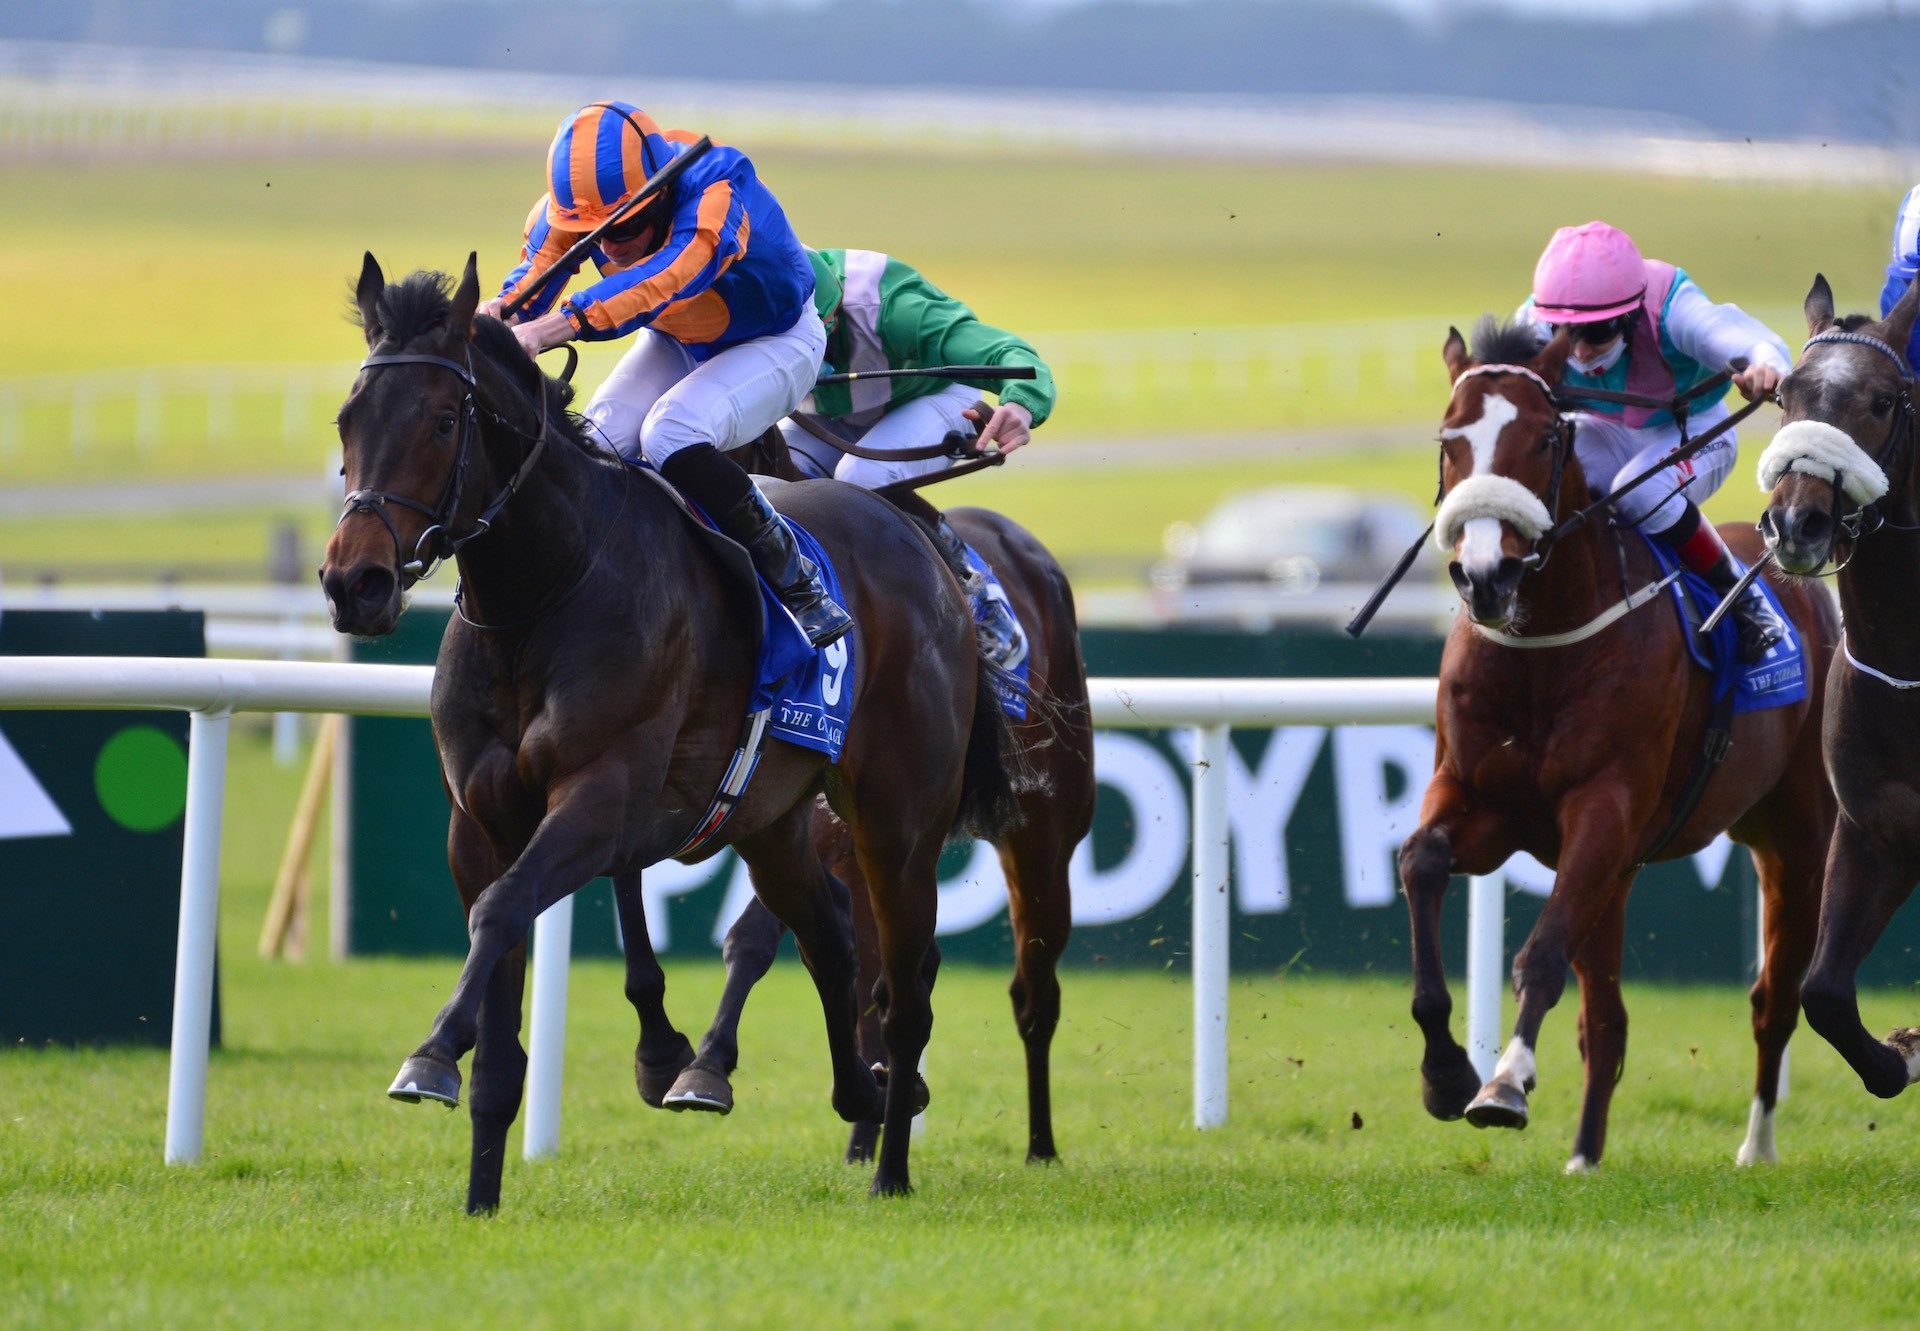 Horoscope (No Nay Never) Wins His Maiden At The Curragh